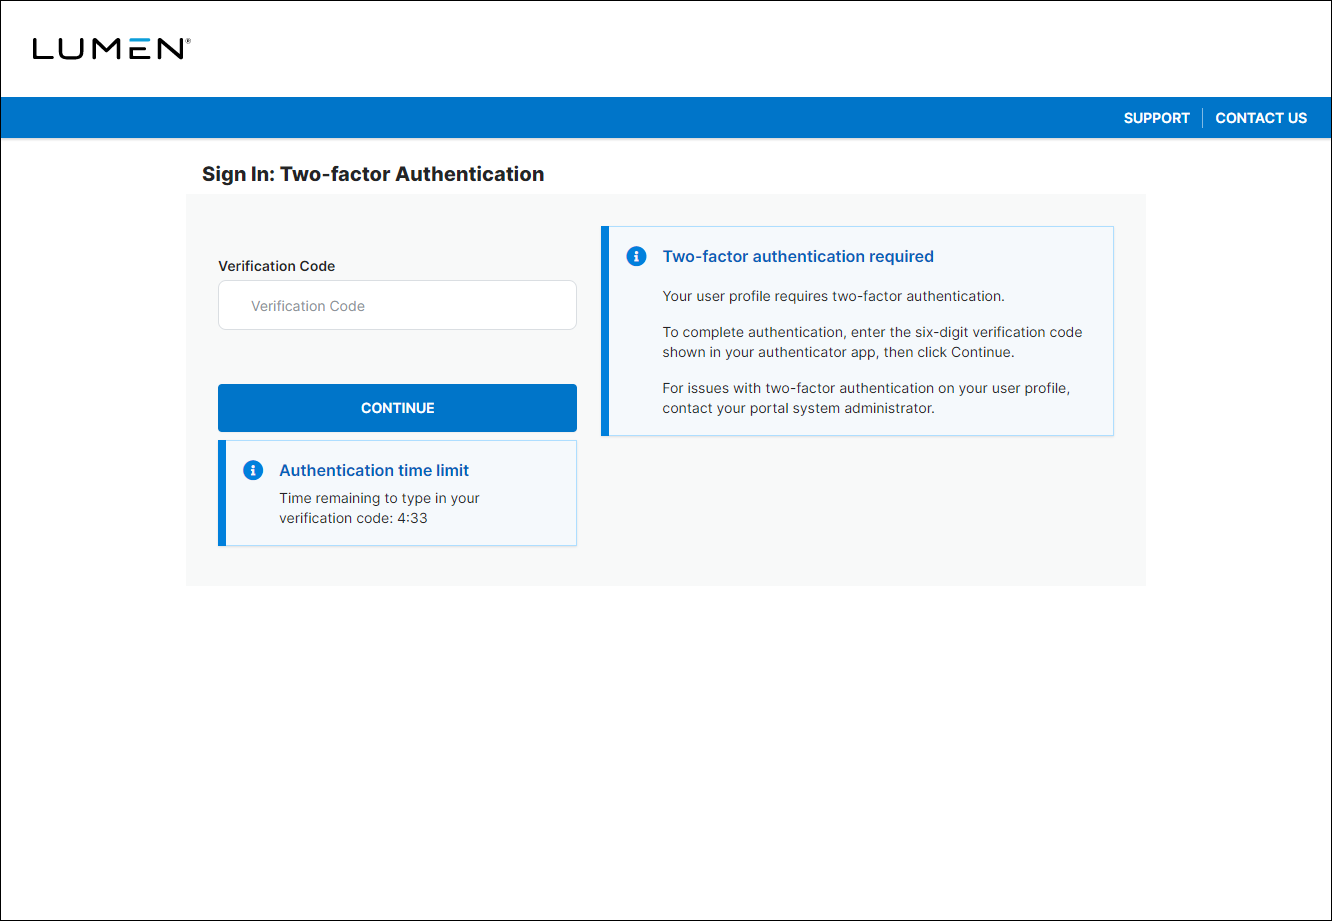 Sign In: Two-factor Authentication